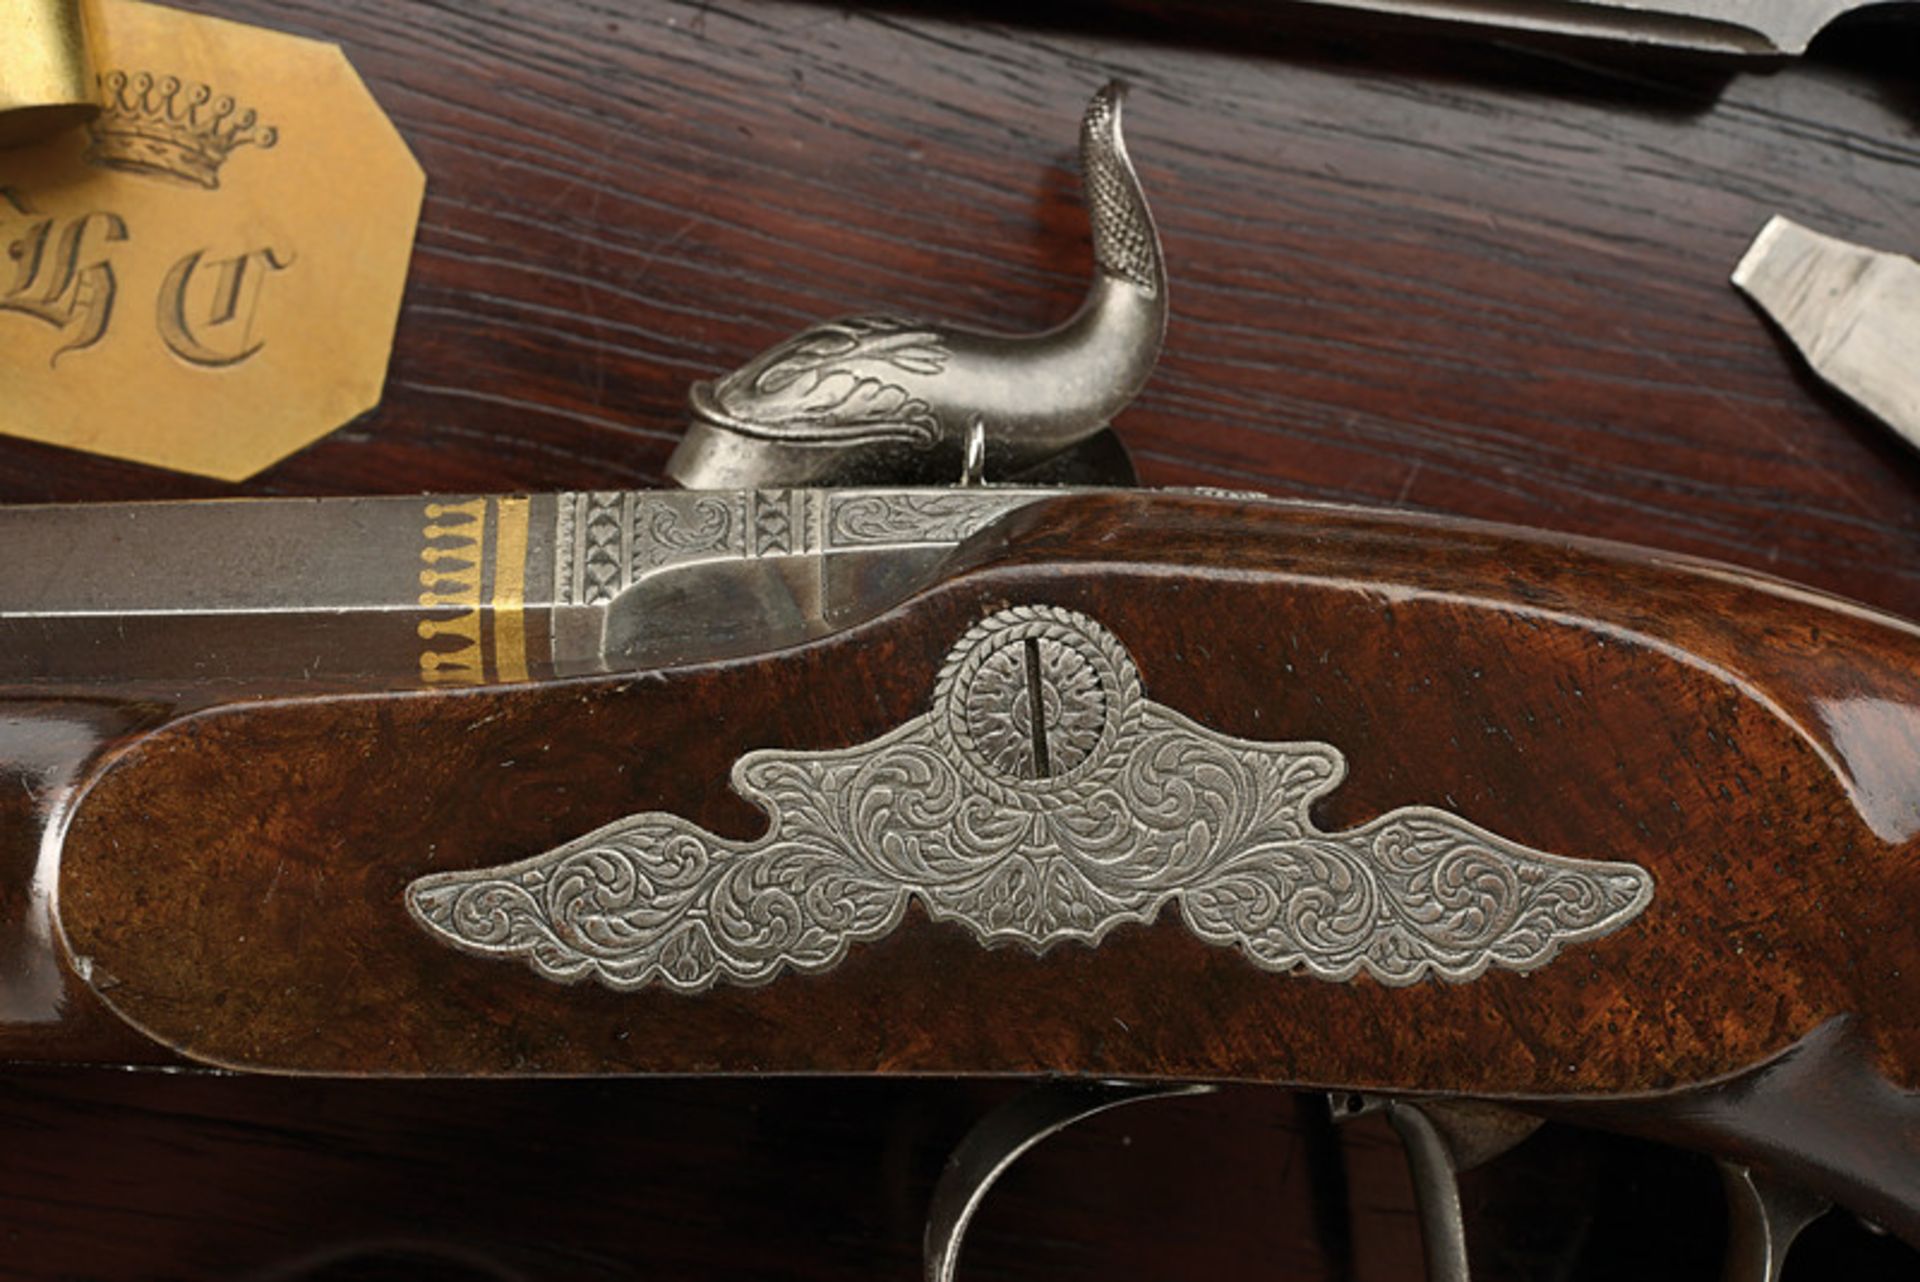 A cased luxury pair of percussion pistols by Lelyon of nobile property dating: mid-19th Century - Image 8 of 10